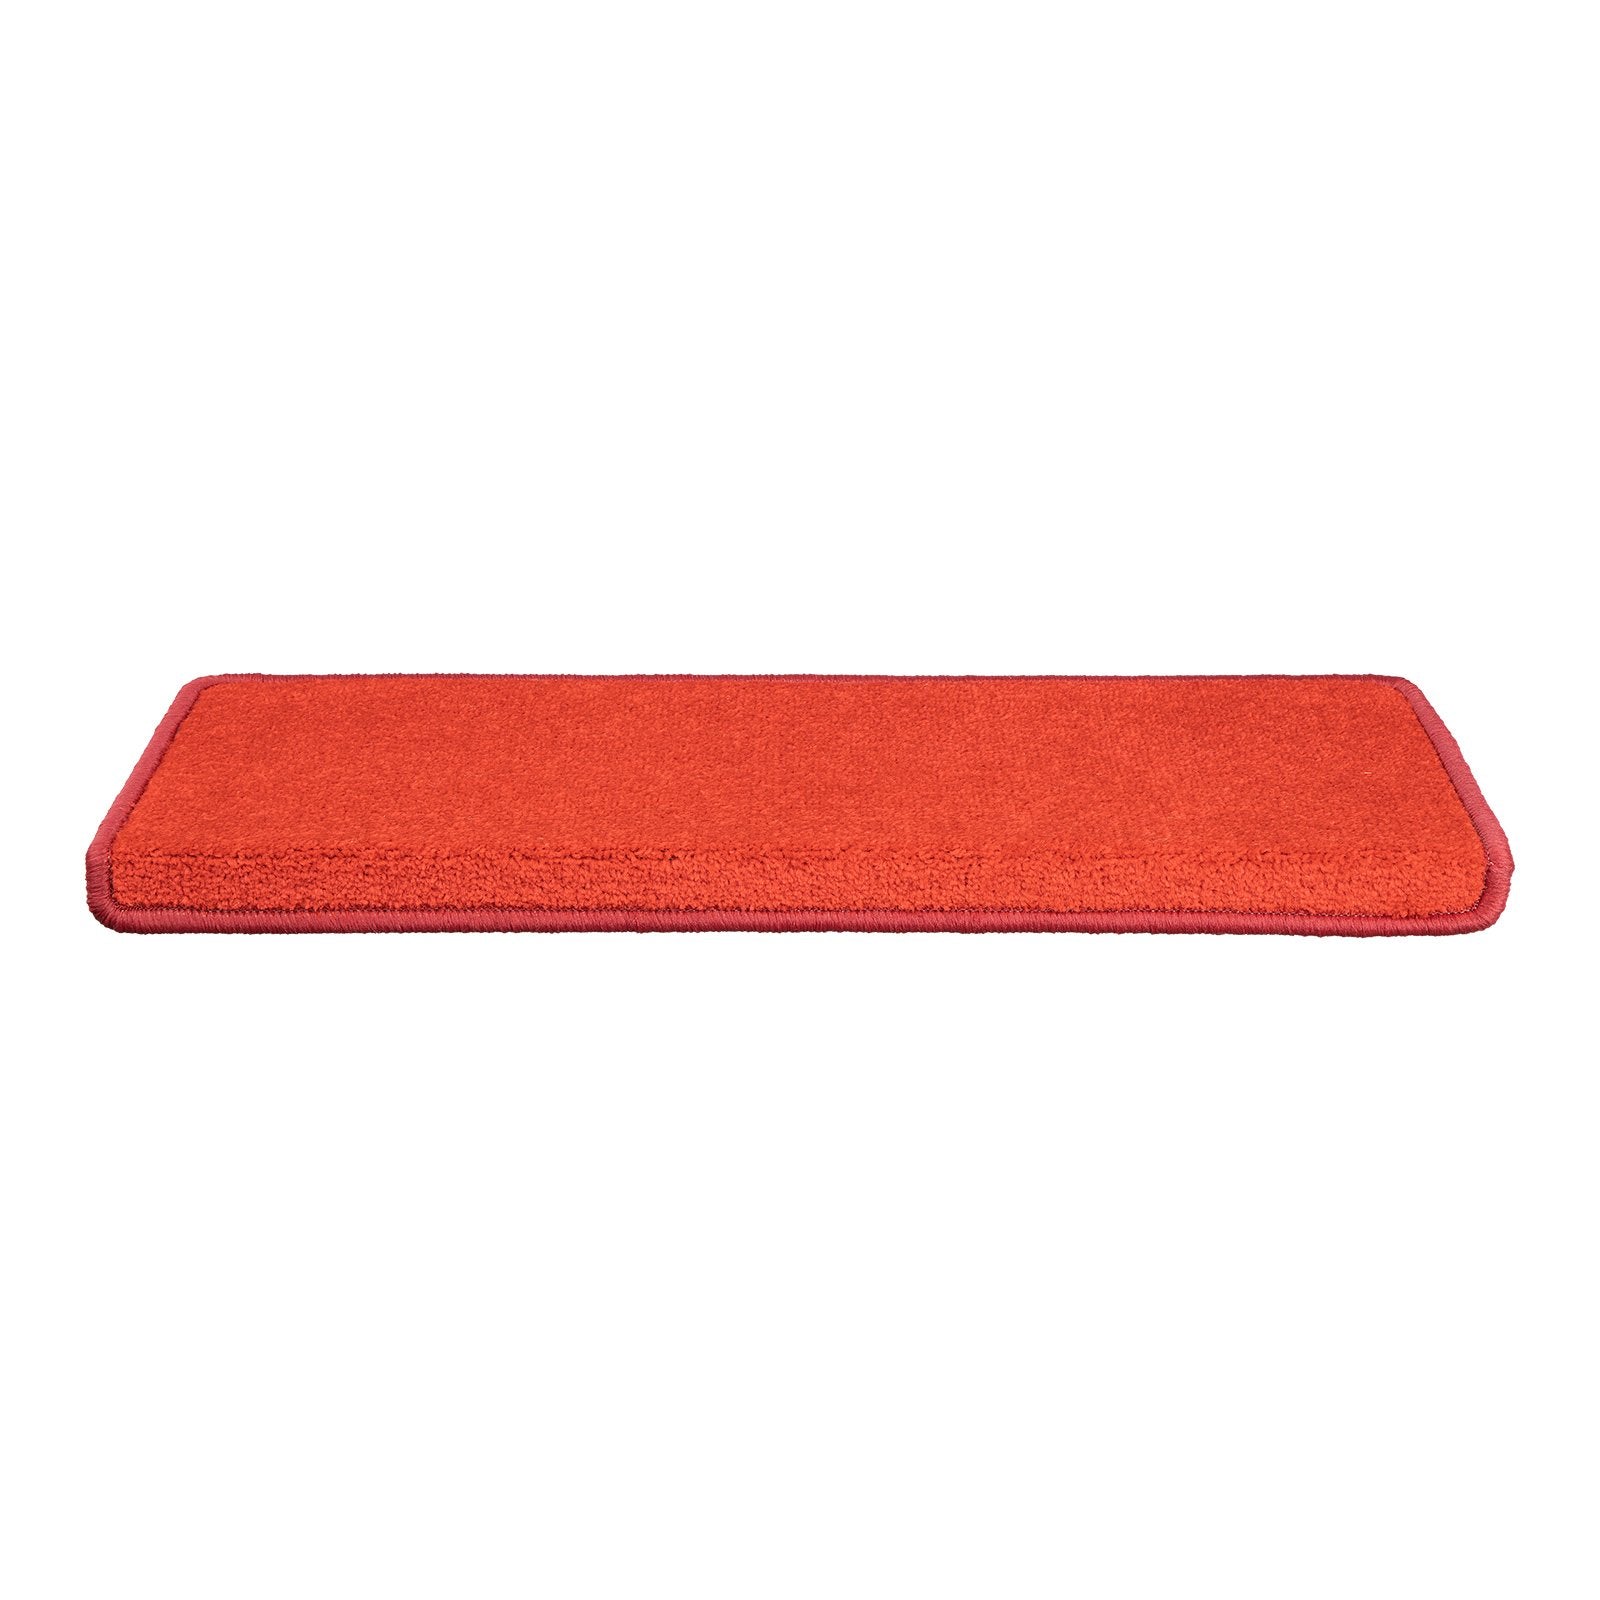 F5_fd-18517 | Rouge | Rectangulaire